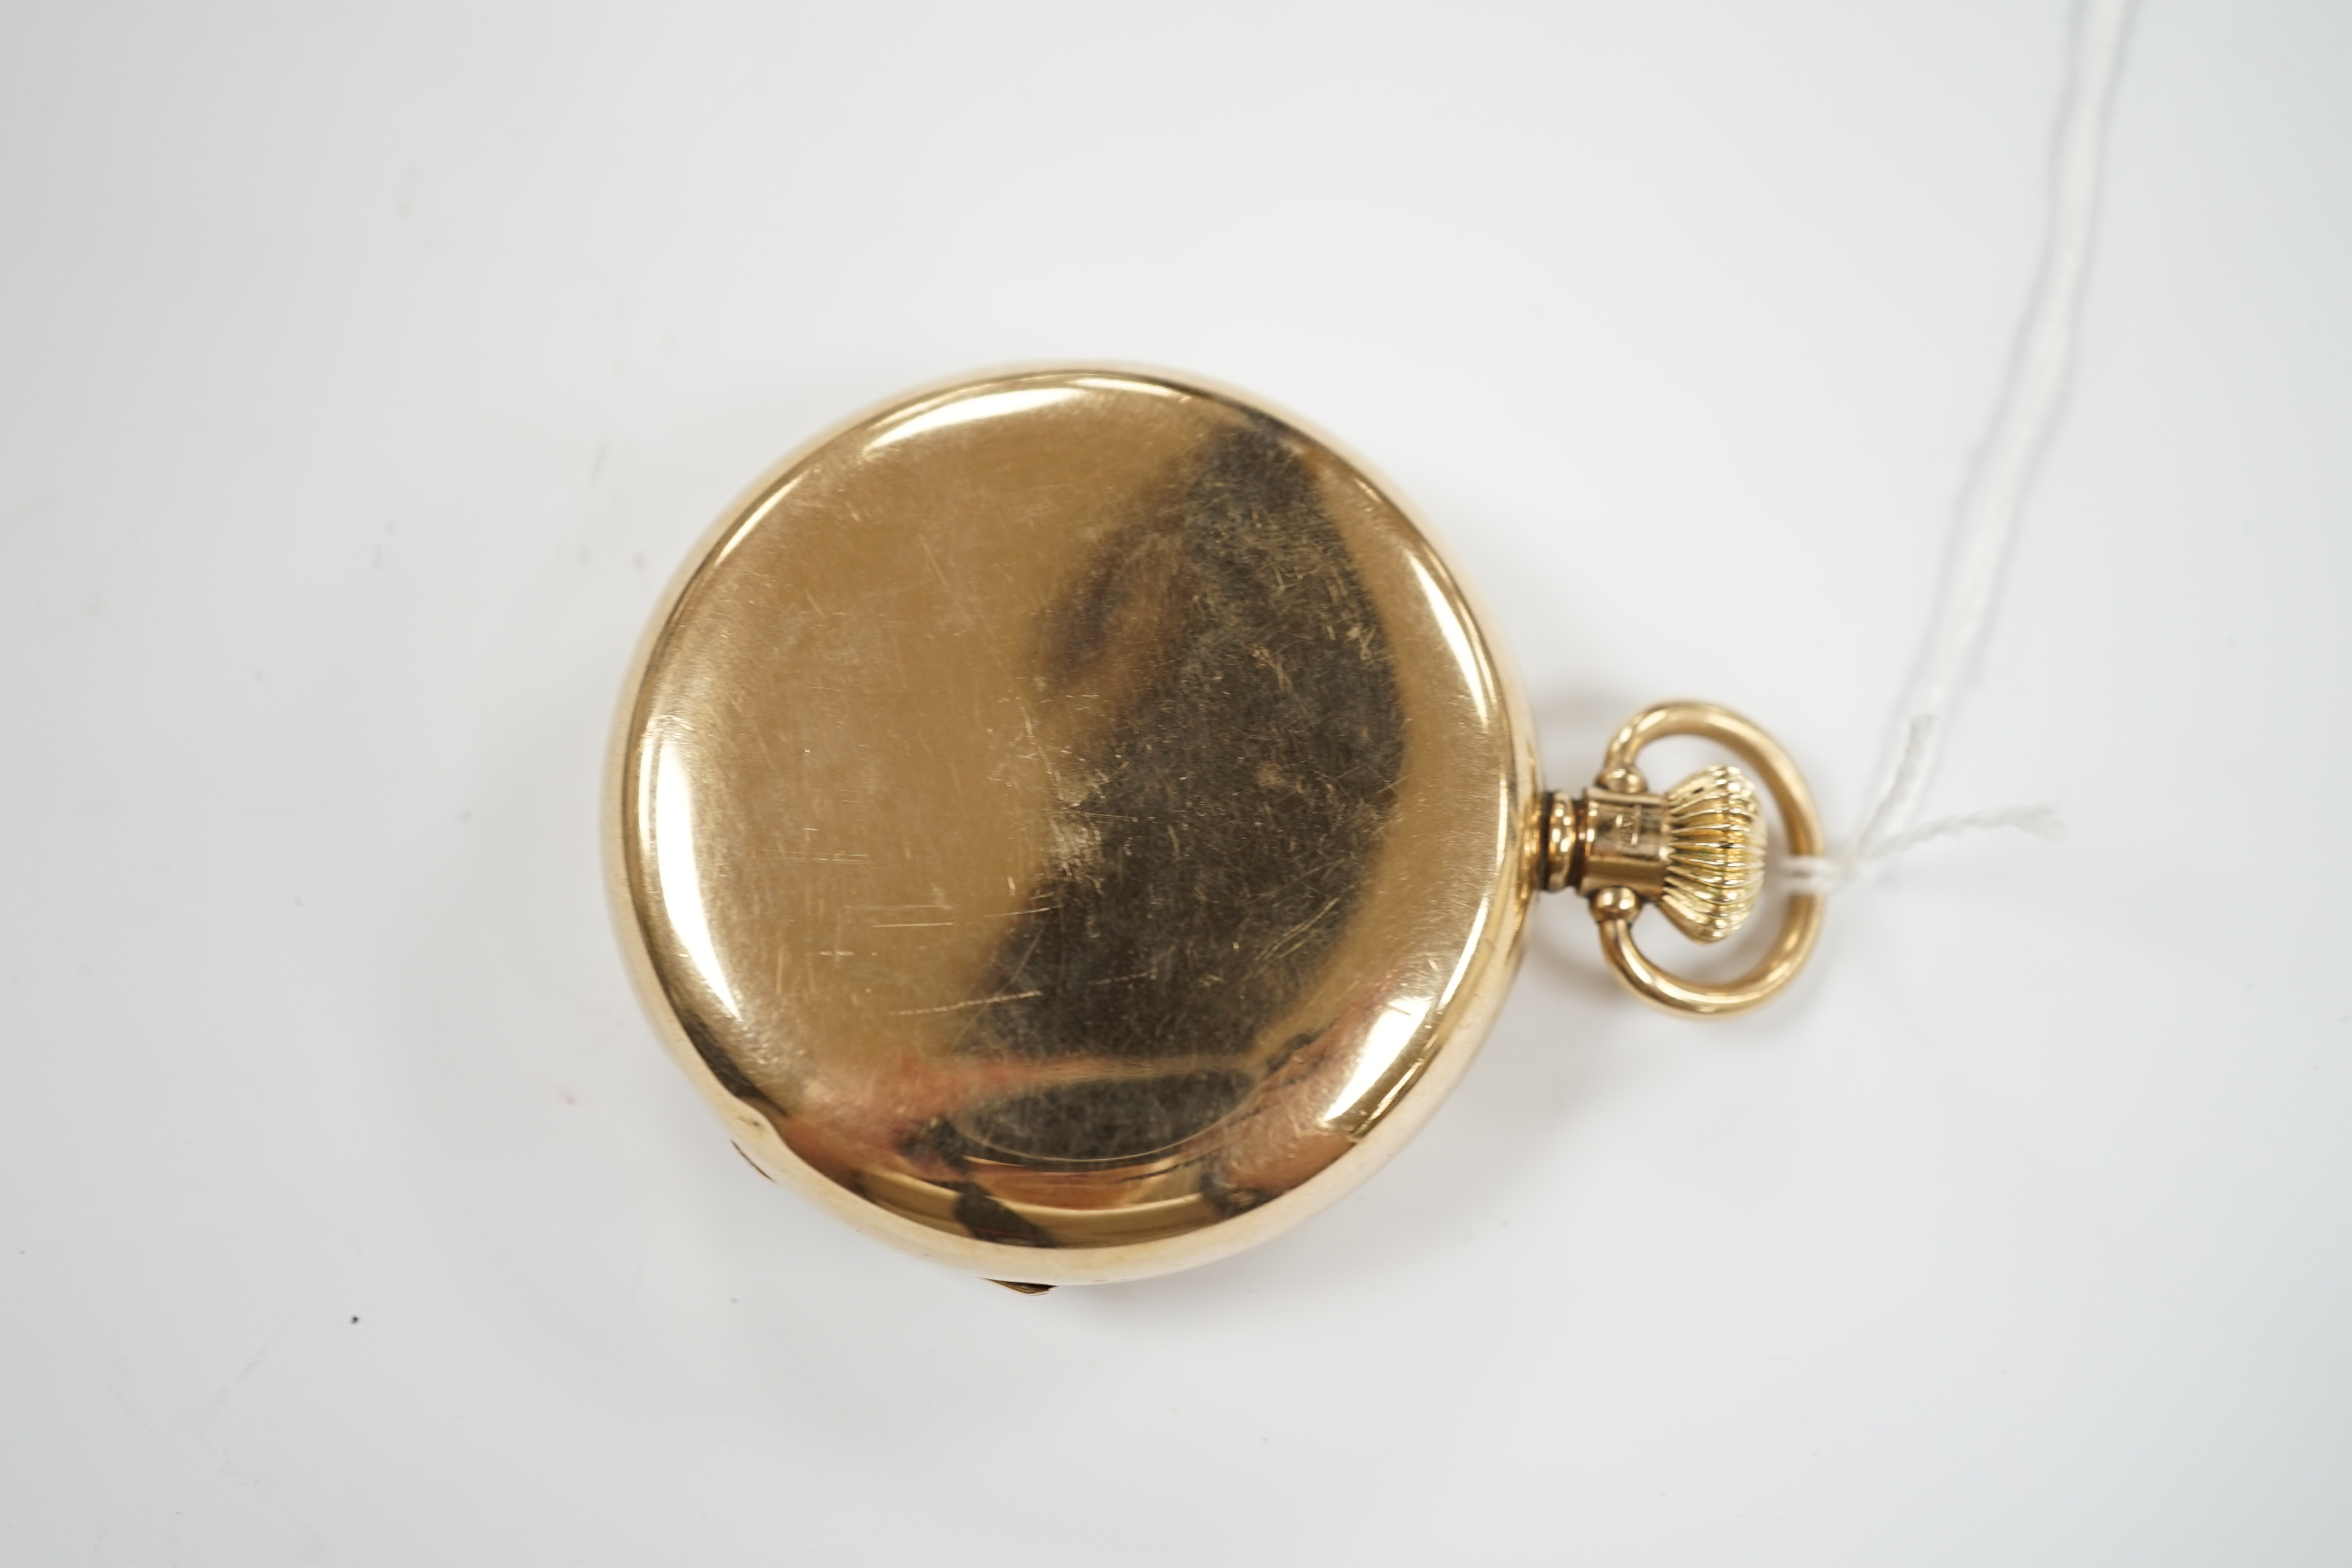 An early 20th century Waltham 9ct gold open face keyless pocket watch, with Roman dial and subsidiary seconds, case diameter 50mm, gross weight 97.6 grams.